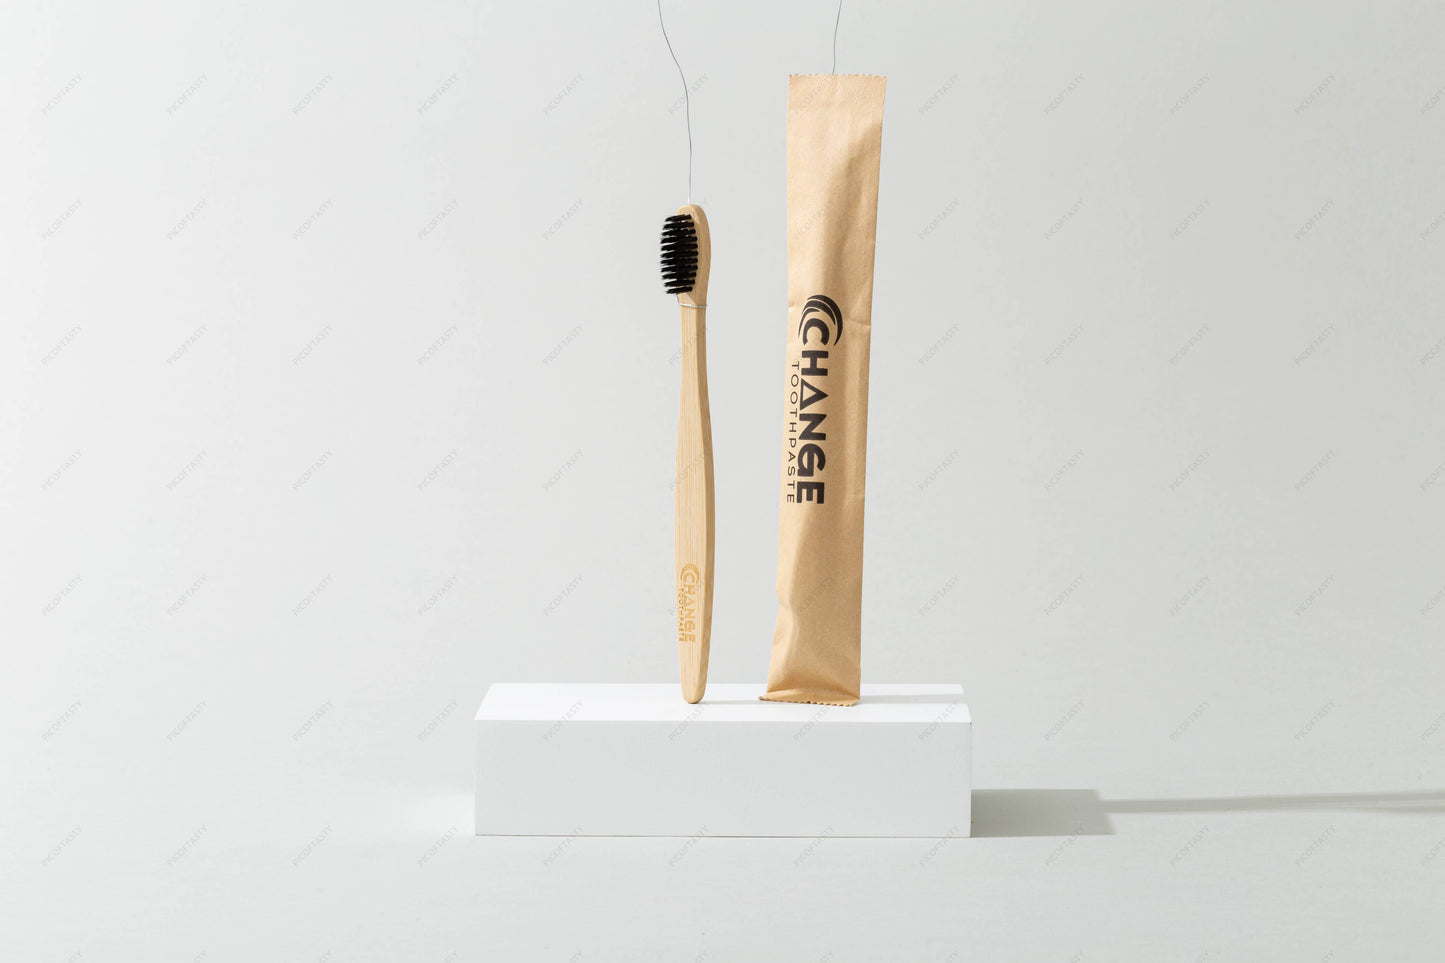 Change Toothpaste - Bamboo Toothbrush